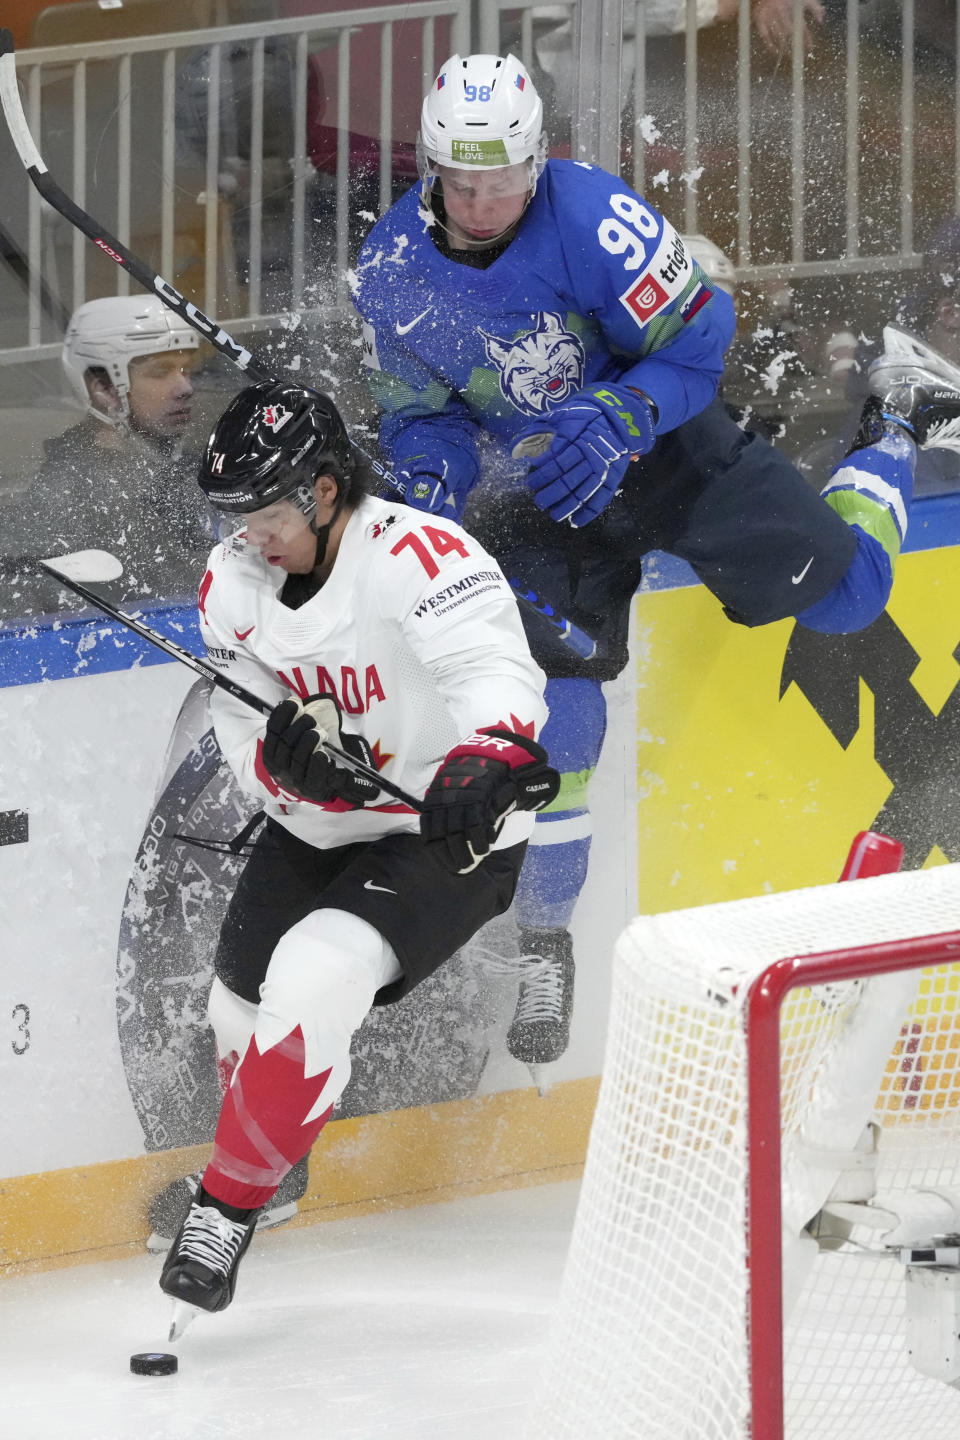 Blaz Tomazevic of Slovenia, right, fights for a puck with Ethan Bear of Canada during the group B match between Slovenia and Canada at the ice hockey world championship in Riga, Latvia, Sunday, May 14, 2023. (AP Photo/Roman Koksarov)